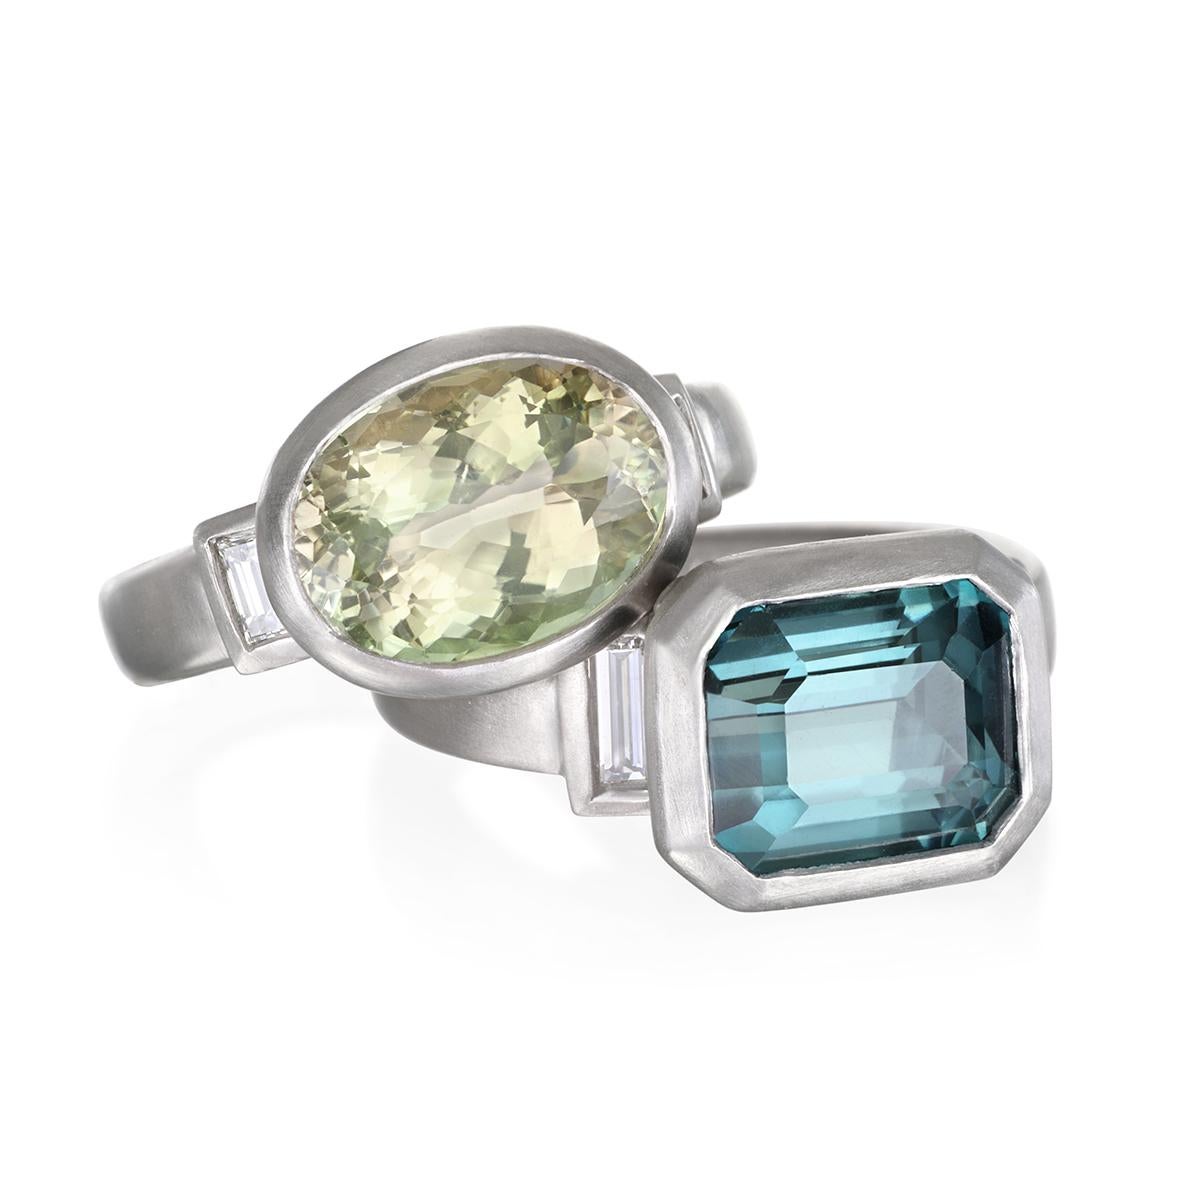 A unique shade of yellow-green. This oval faceted Celery Tourmaline is set with 2 diamond baguettes. 
Bright and sleek in a matte-finished platinum setting,  this ring is a stunning, one-of-a-kind statement piece.

Celery Tourmaline: 5.31